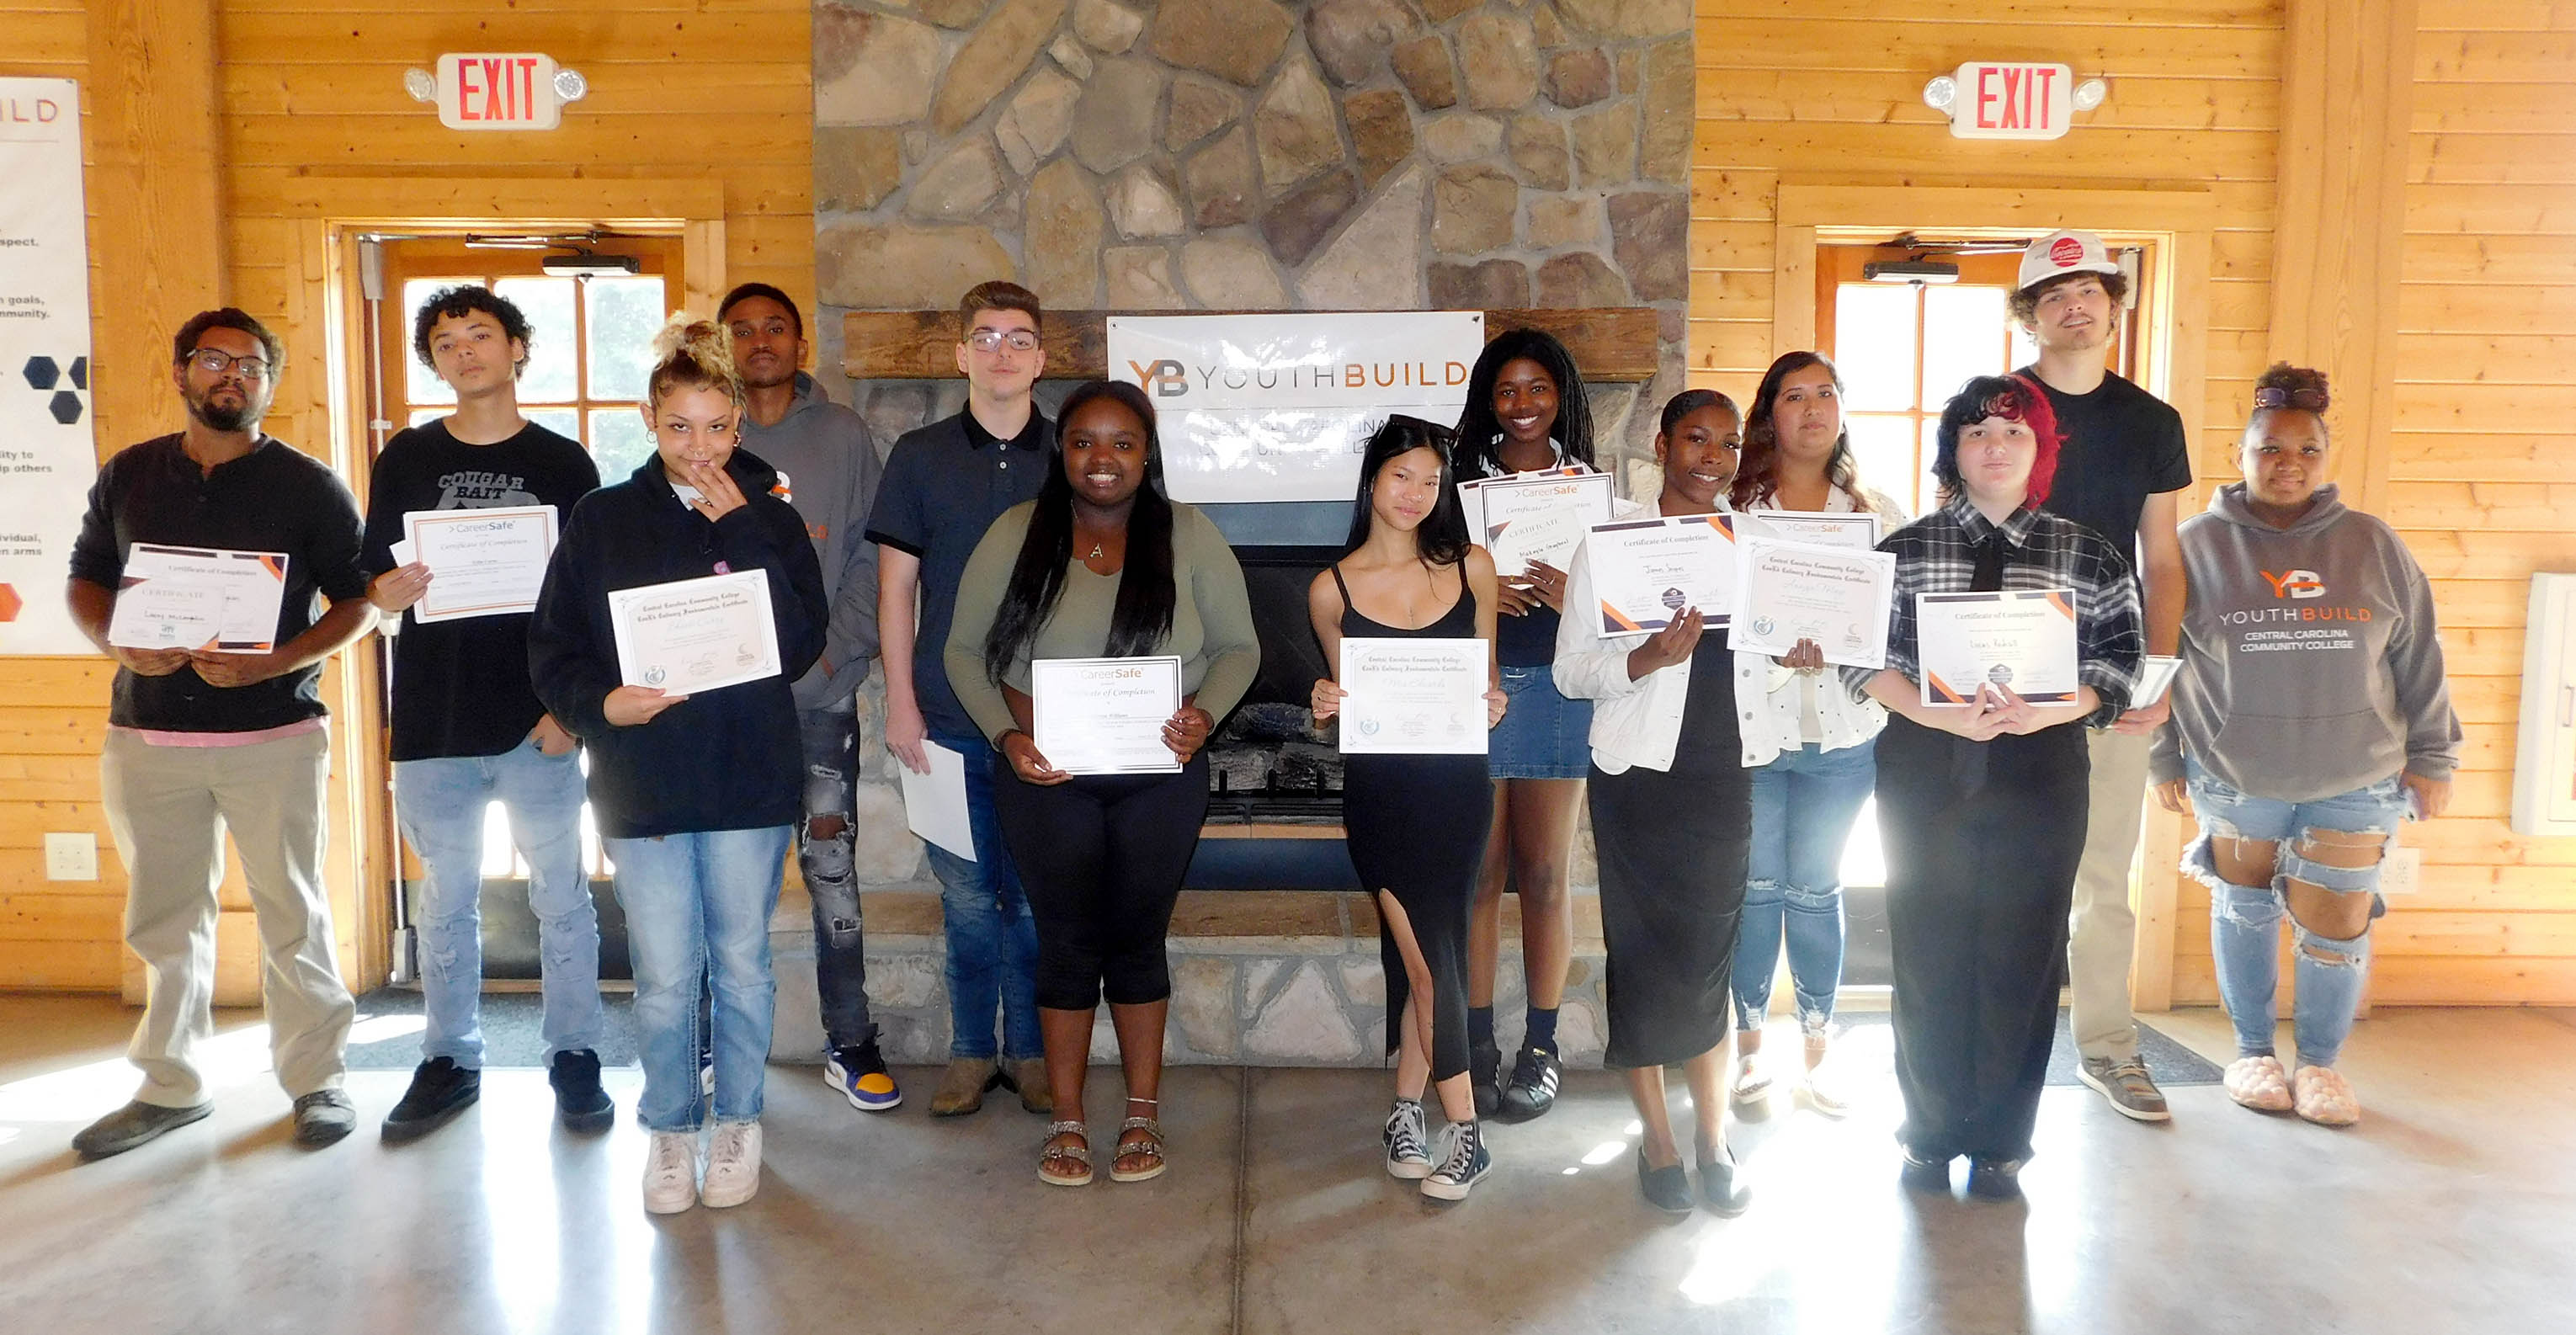 CCCC YouthBuild presents awards